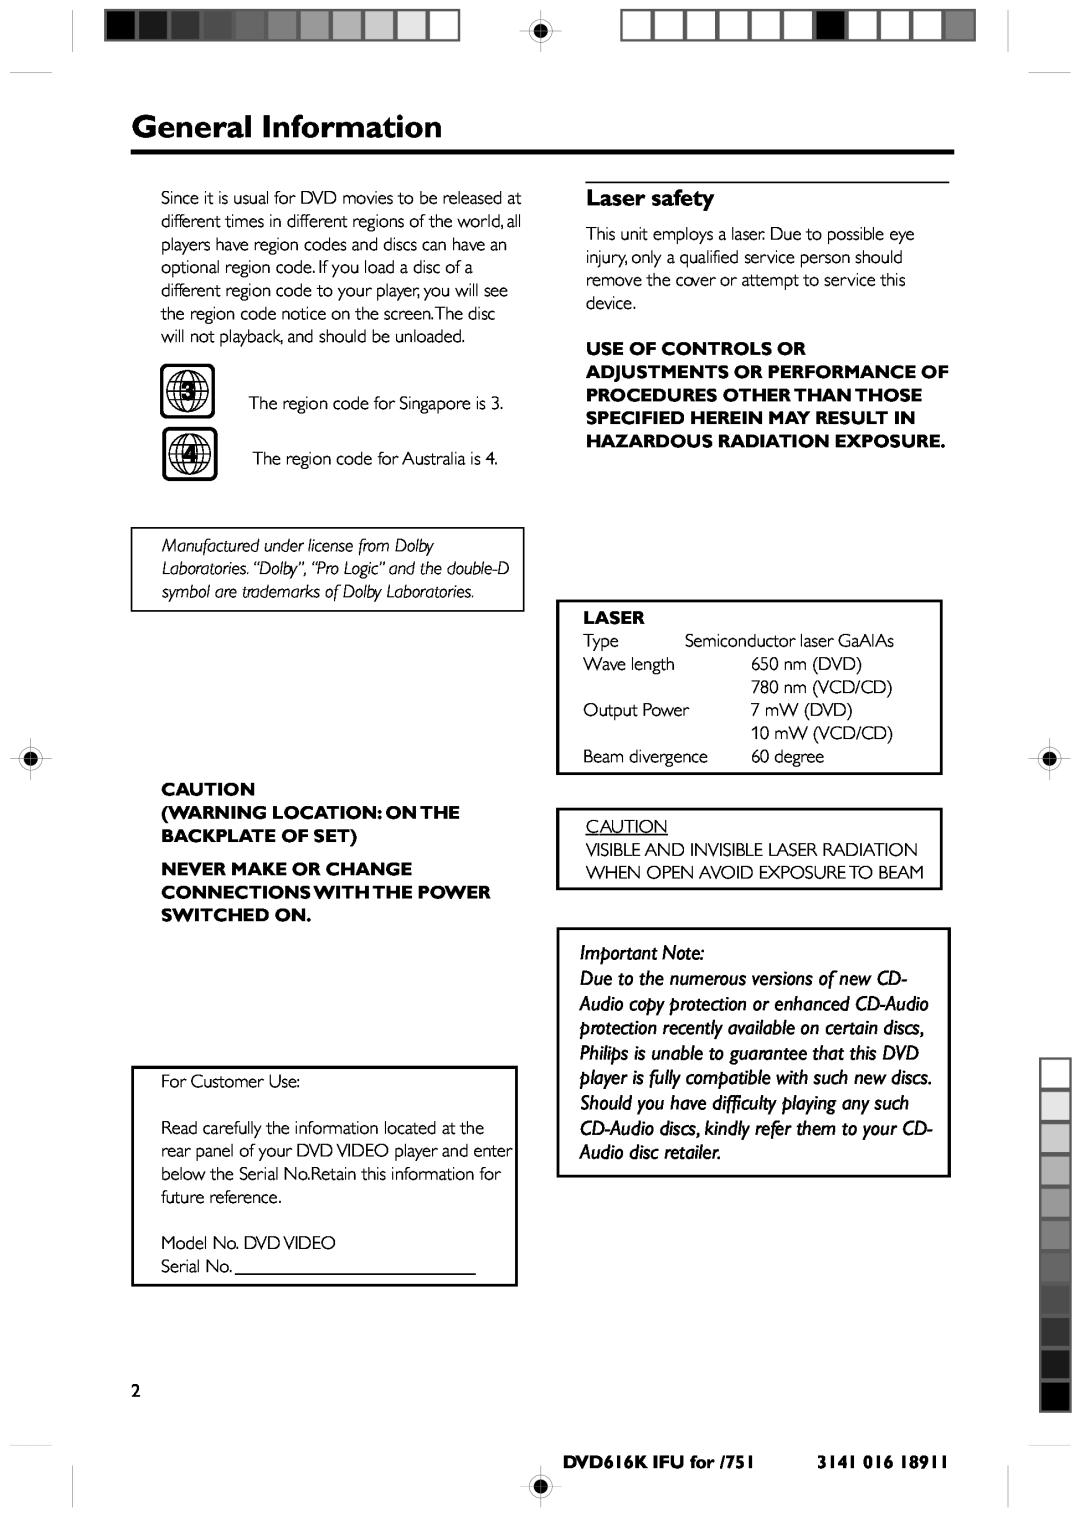 Philips DVD616K manual General Information, Laser safety, Important Note 